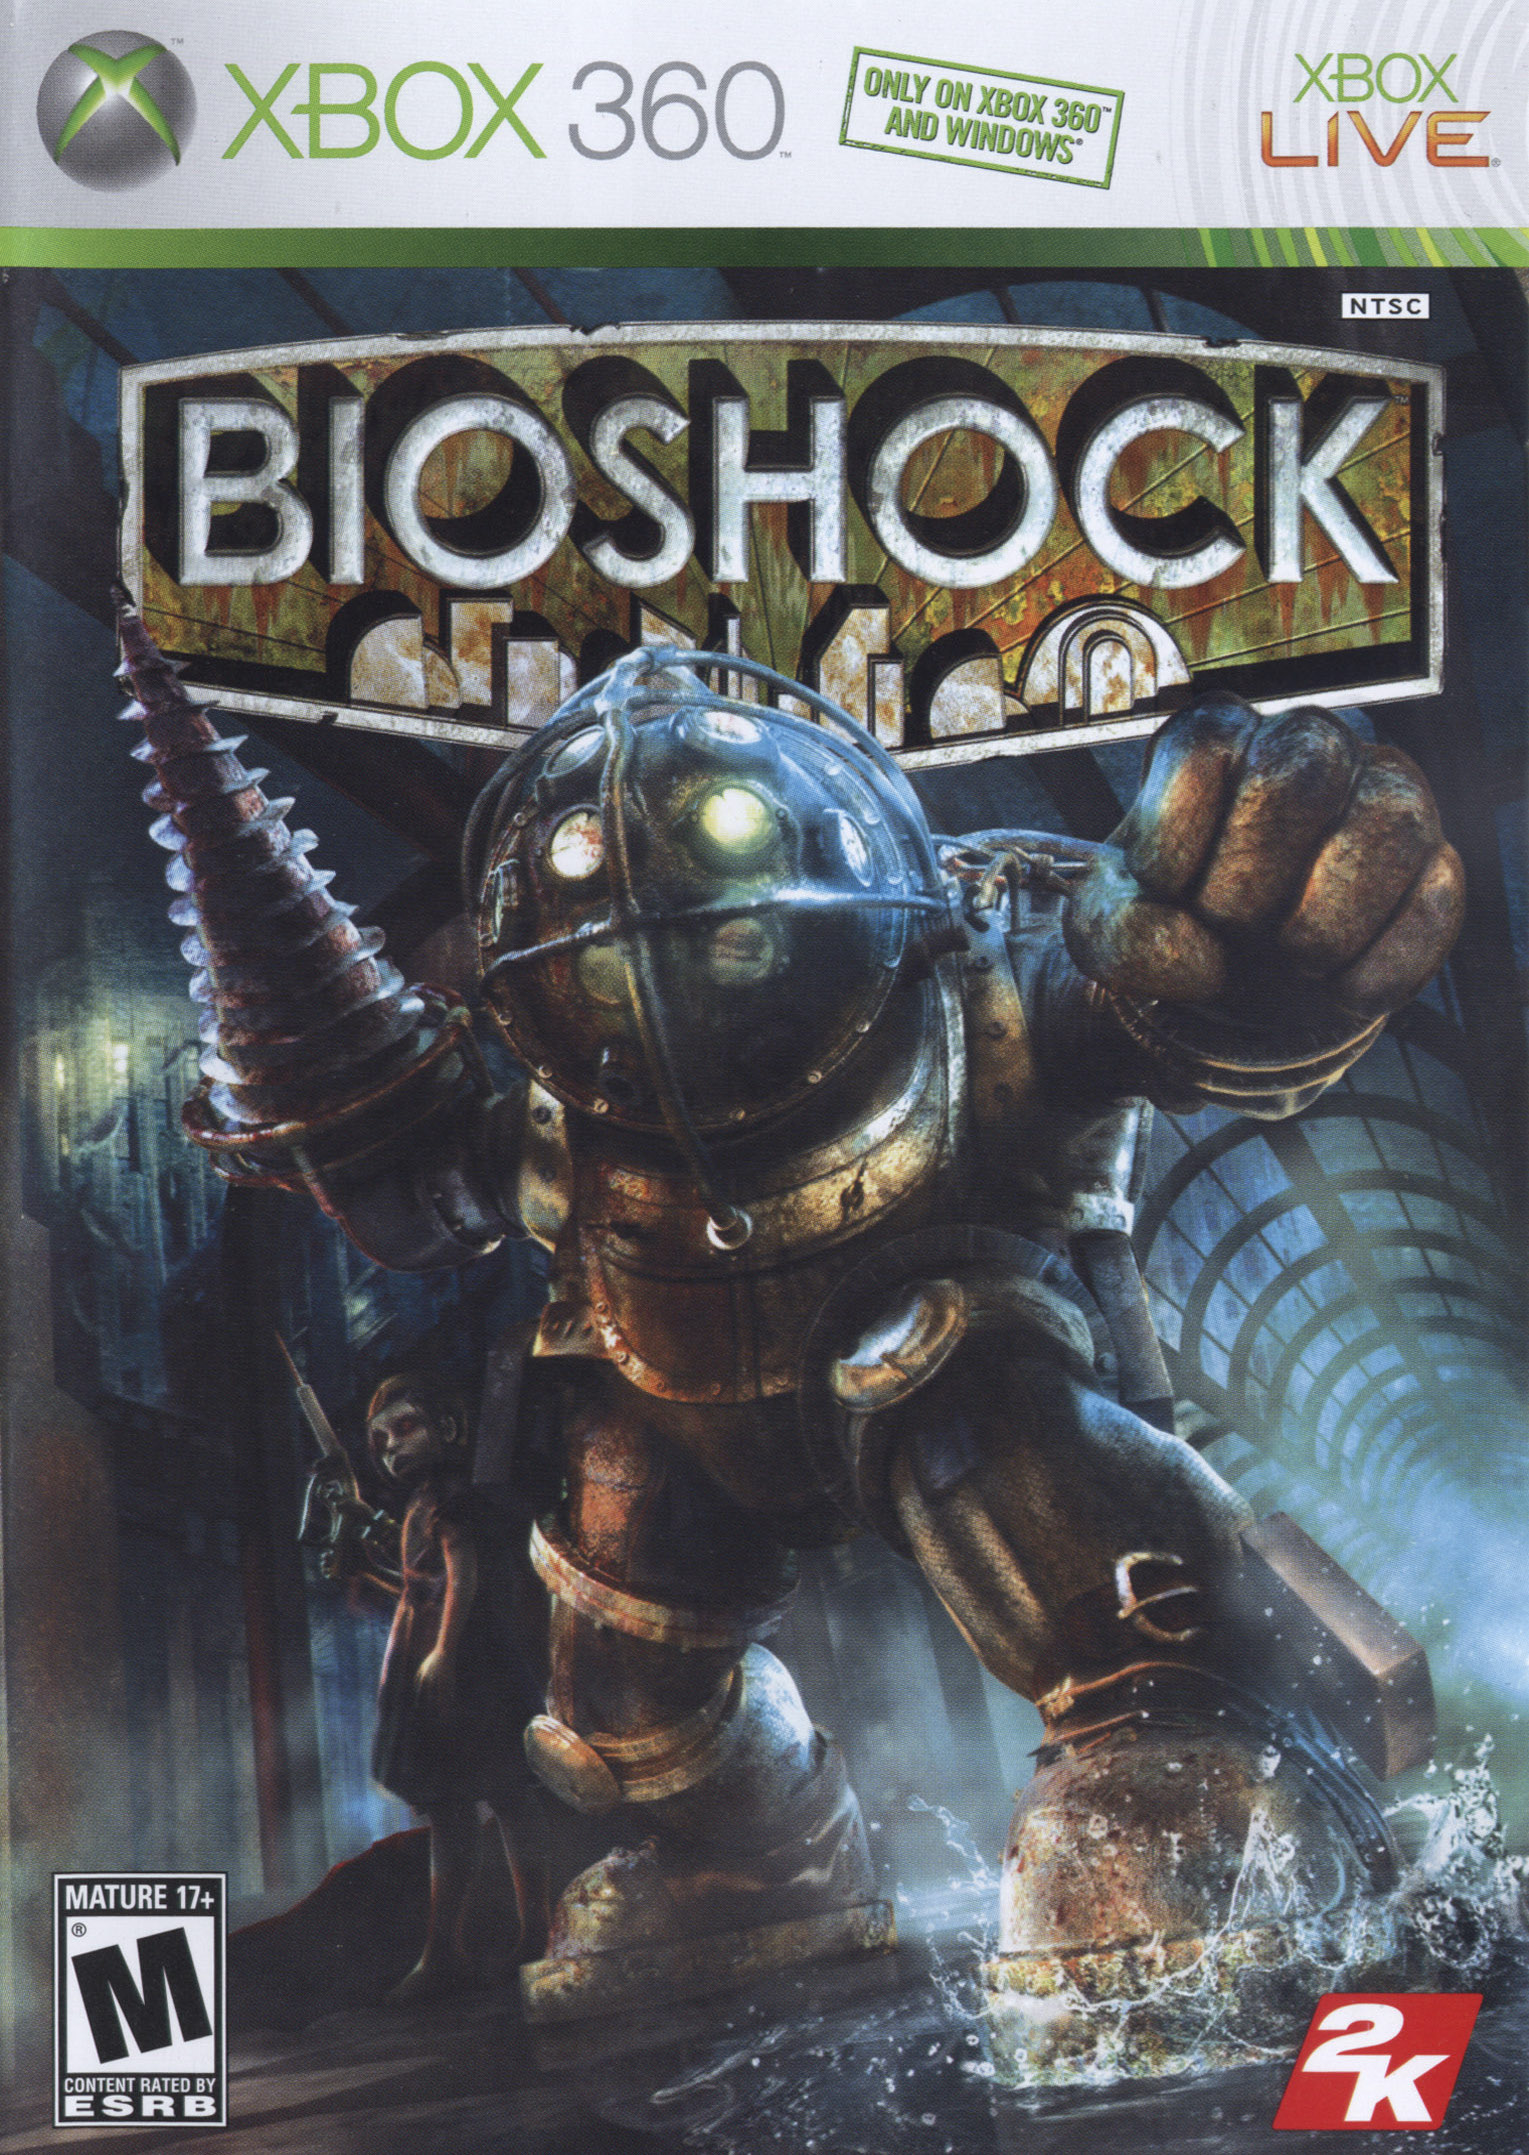 Bioshock Strategywiki The Video Game Walkthrough And Strategy